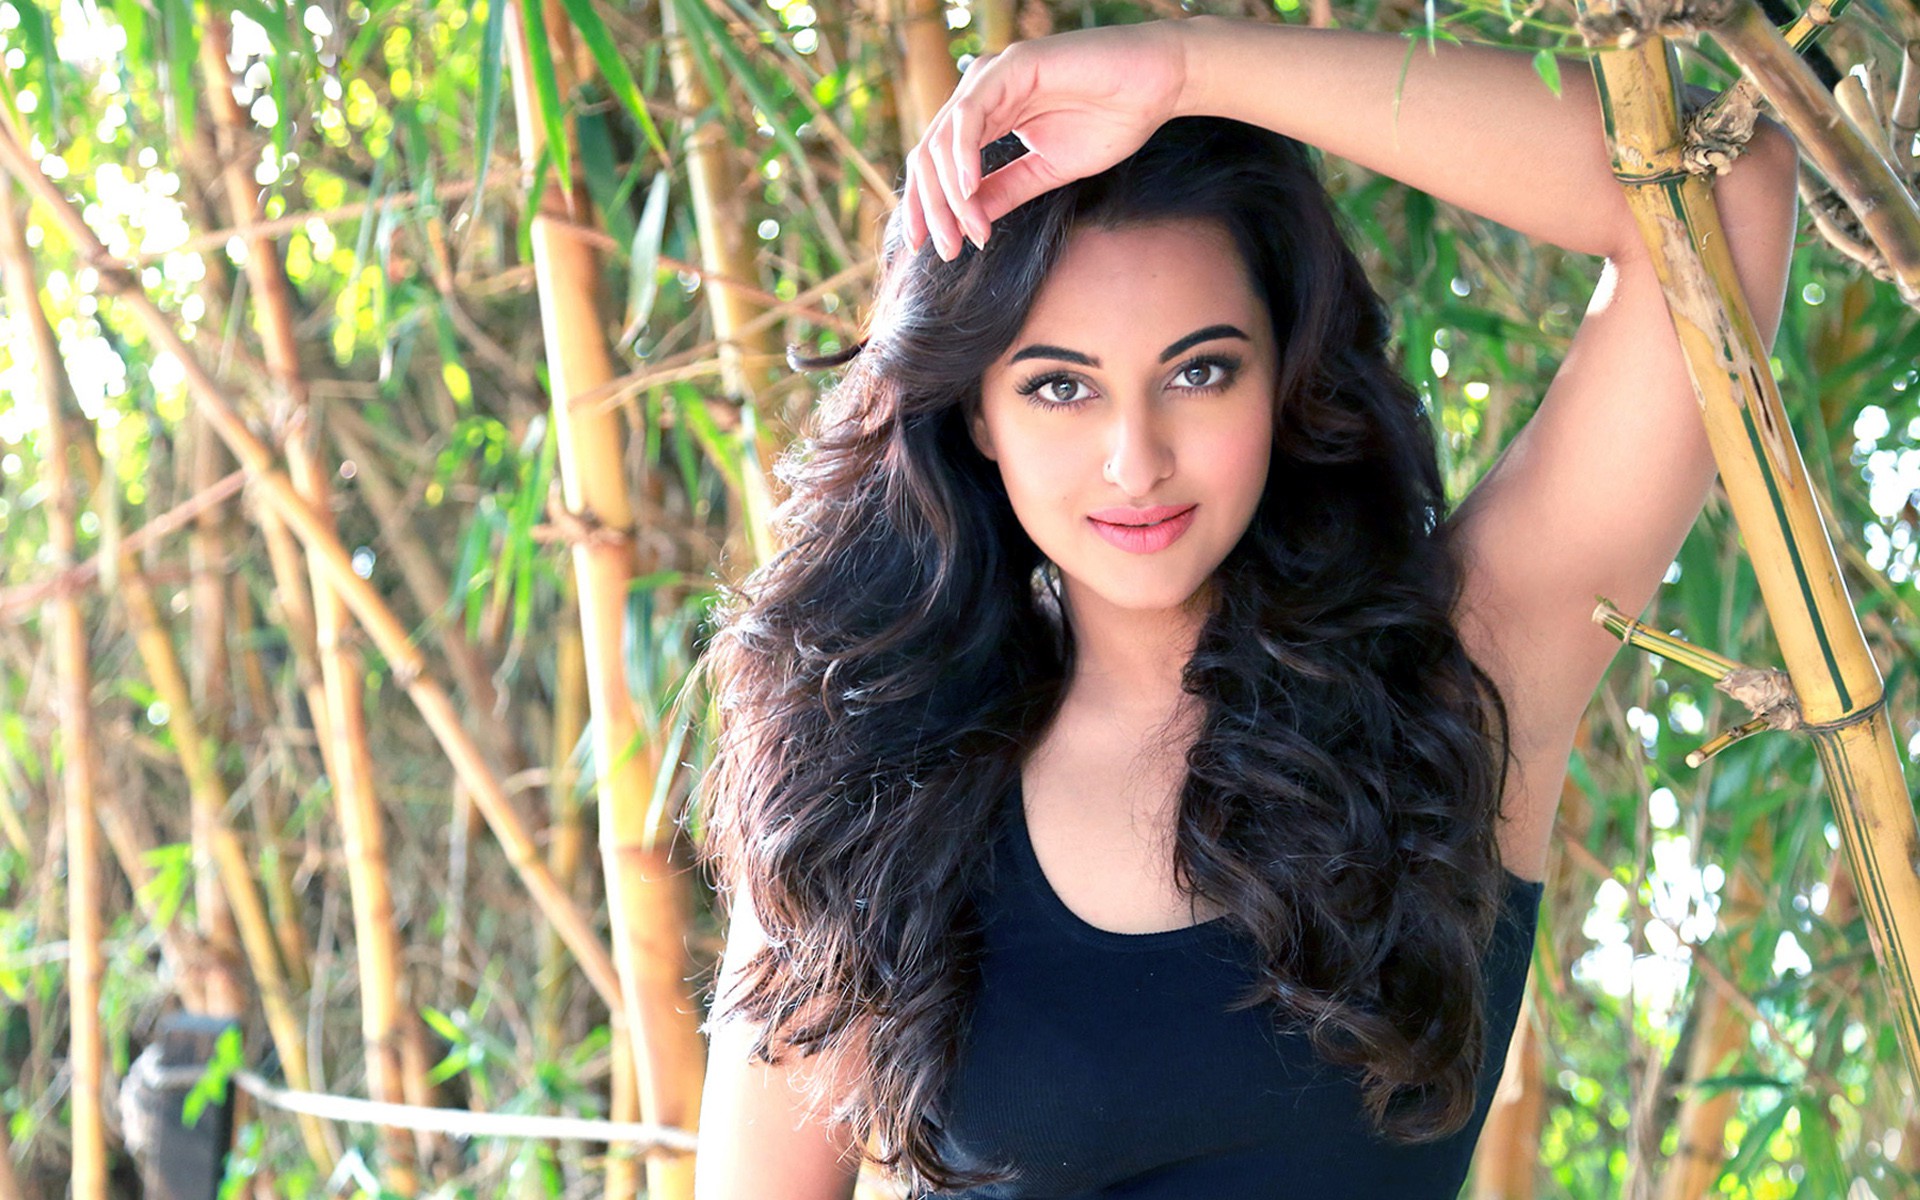 beauty and amazing sonakshi sinha hot photos wallpapers download